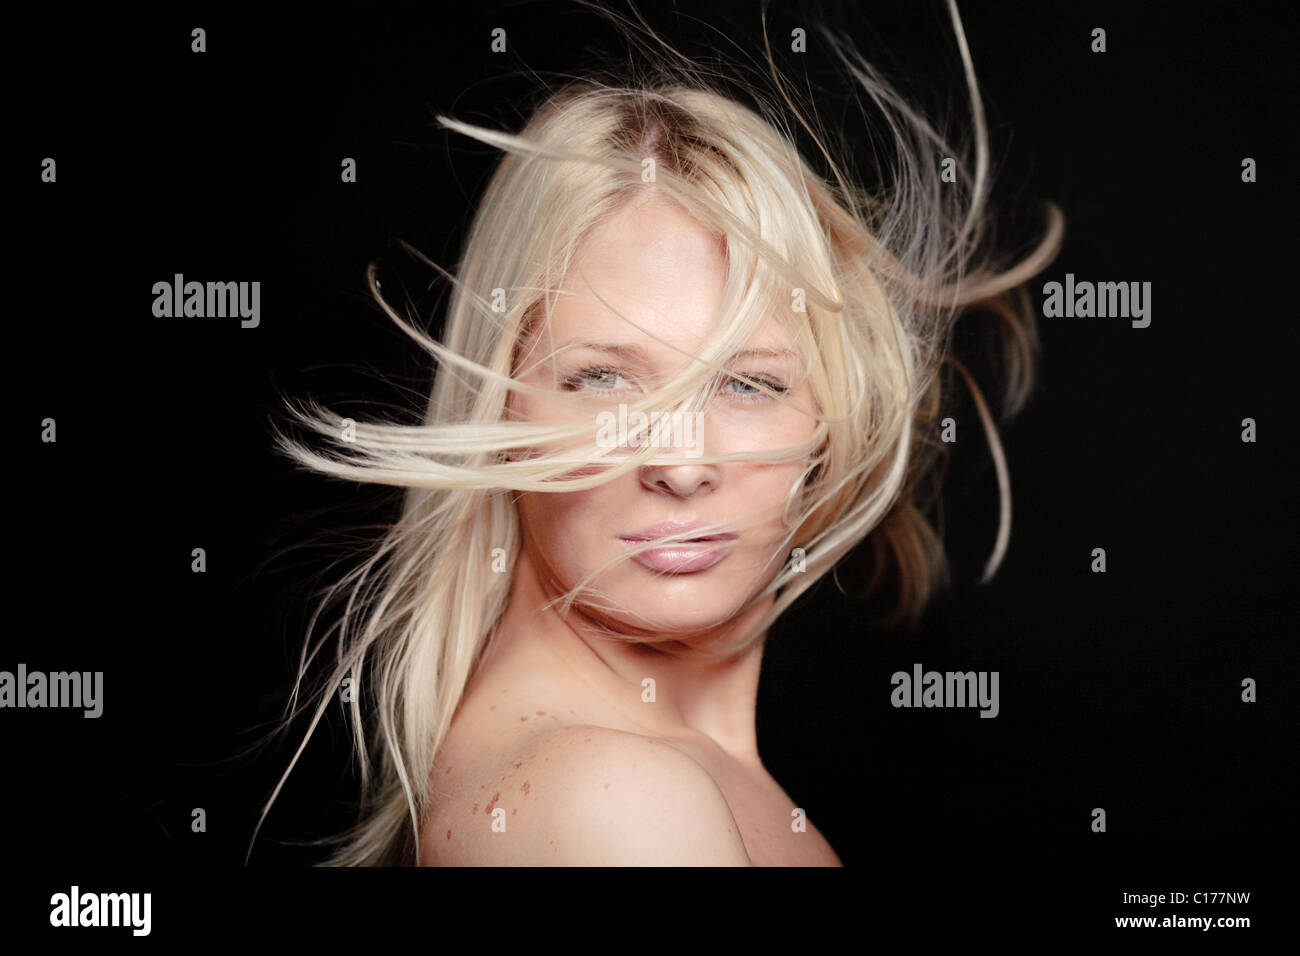 Portrait of a young blond woman with blowing hair in front of black screen Stock Photo